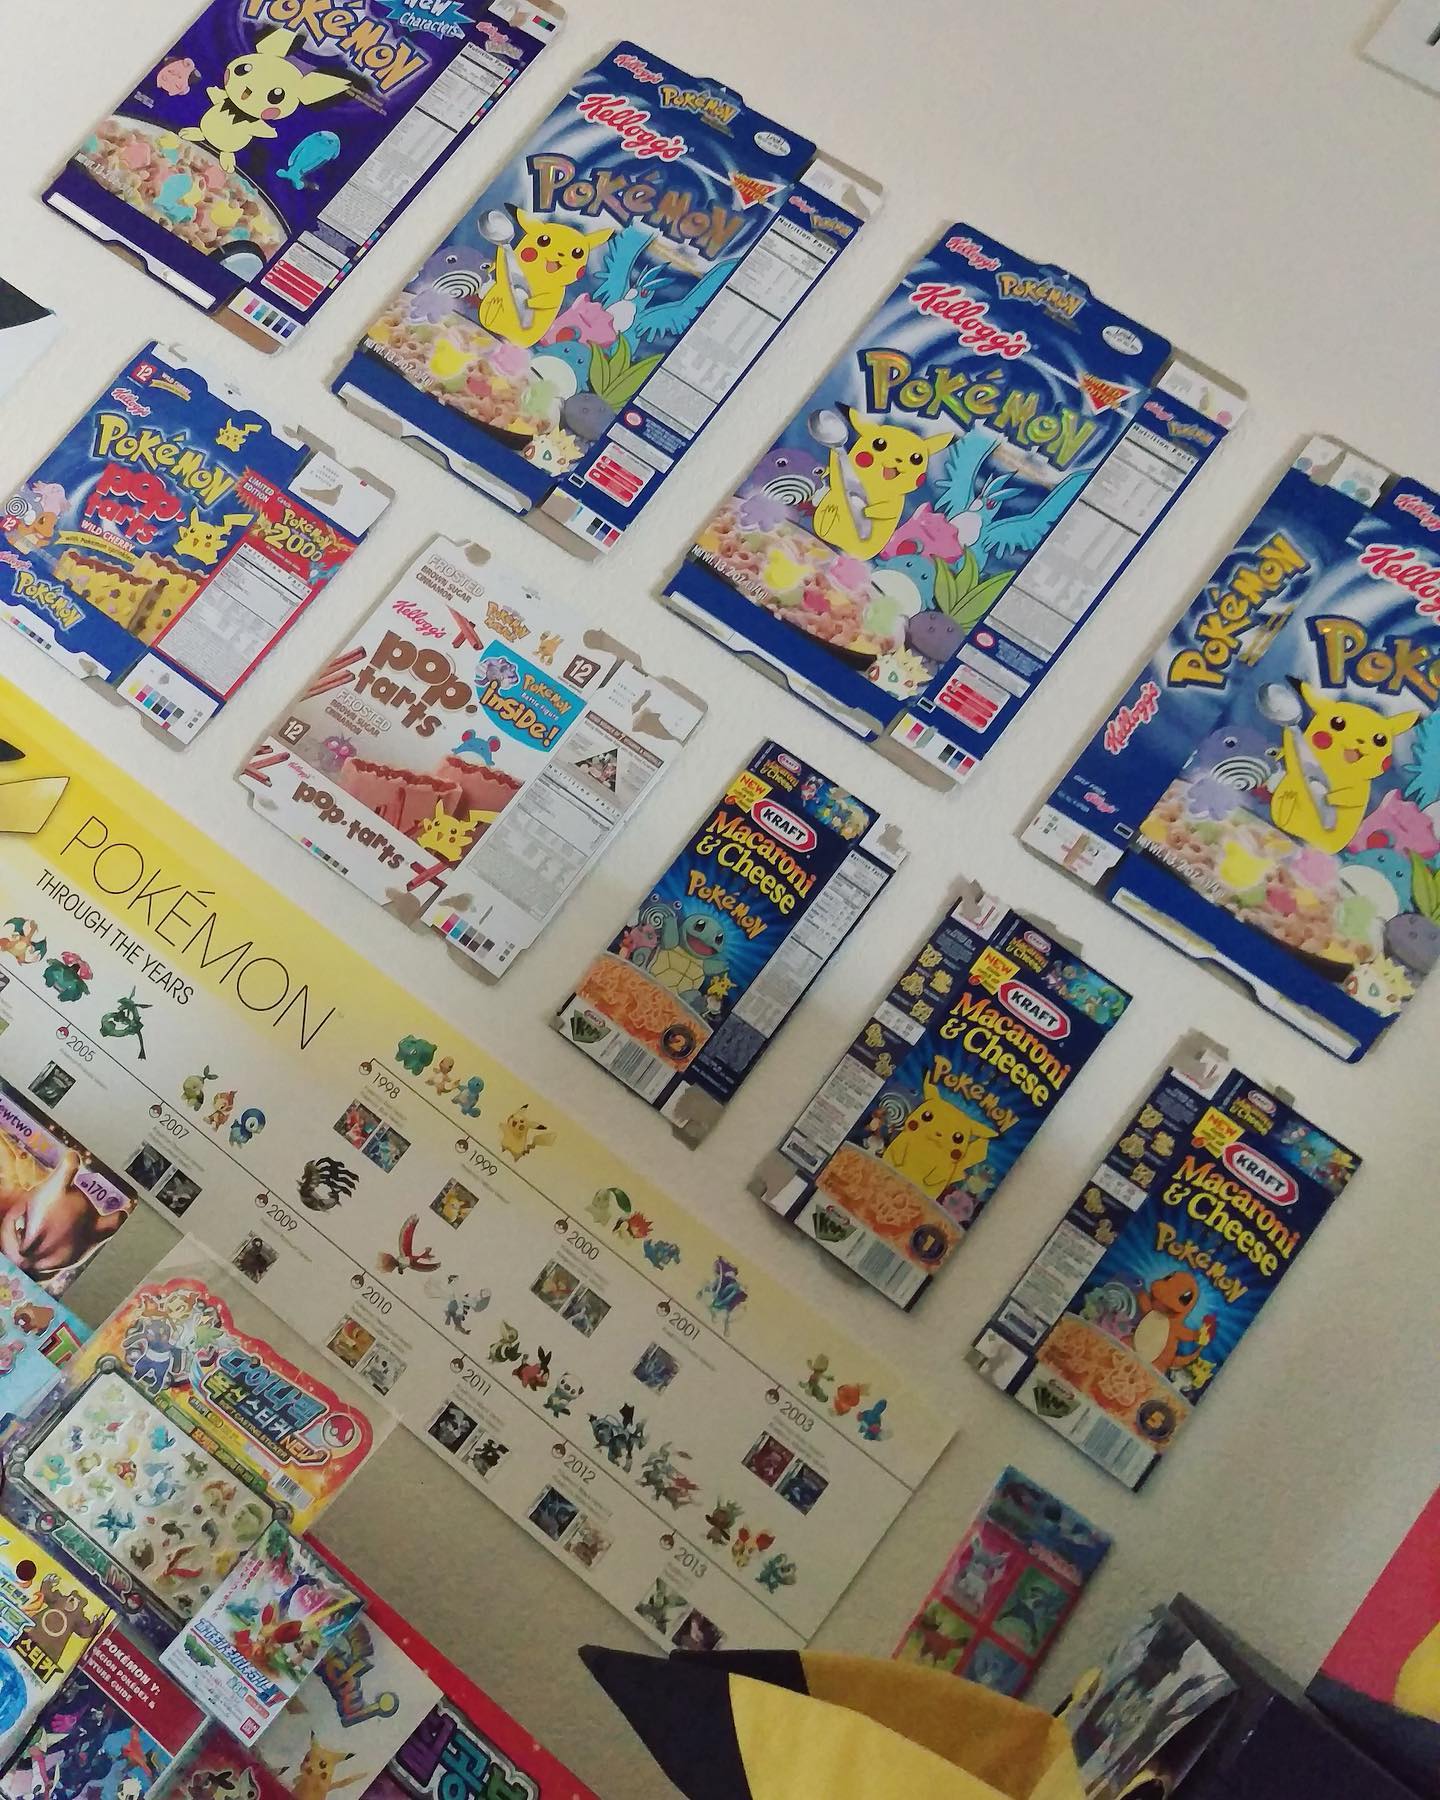 Repost of my best set up for my Pokemon collection when I was in Texas. 🥺 now, it’s all in trash bags in my mom’s attic if any of y’all were wondering. I started a mini collection here in Japan but I’m trying real hard not to expand it too much cause I’m not sure where I’ll be within the next X years.